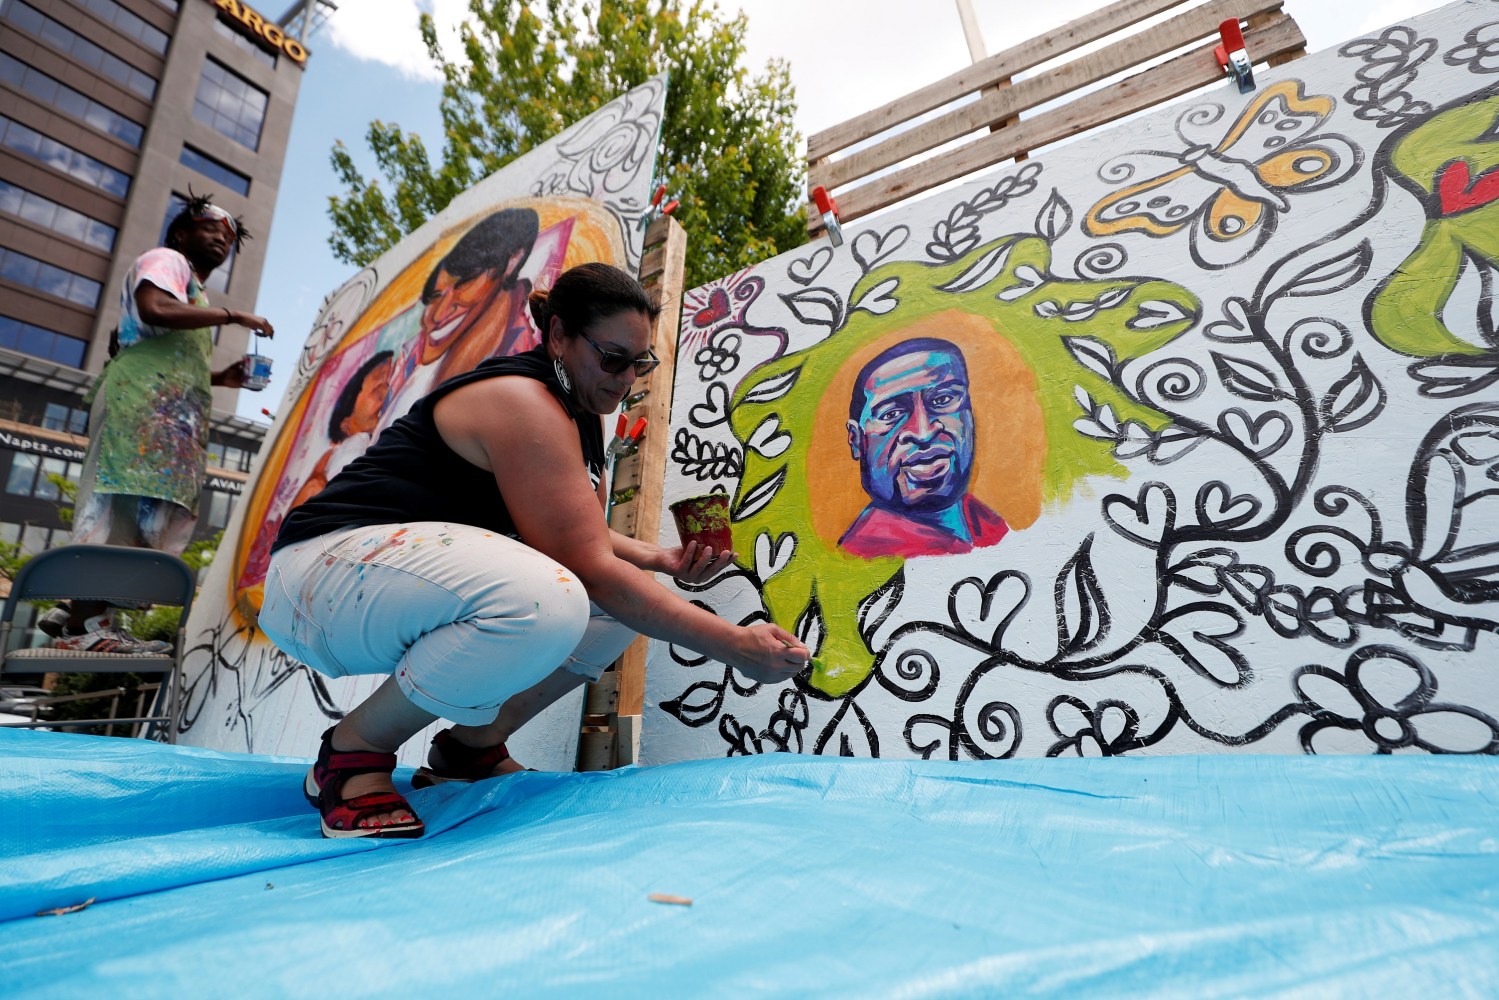 Melodee Strong paints a mural at a Celebration of Life festival in honor of George Floyd, on the first anniversary of his death, in Minneapolis, Minnesota, U.S. May 25, 2021. REUTERS/Eric Miller